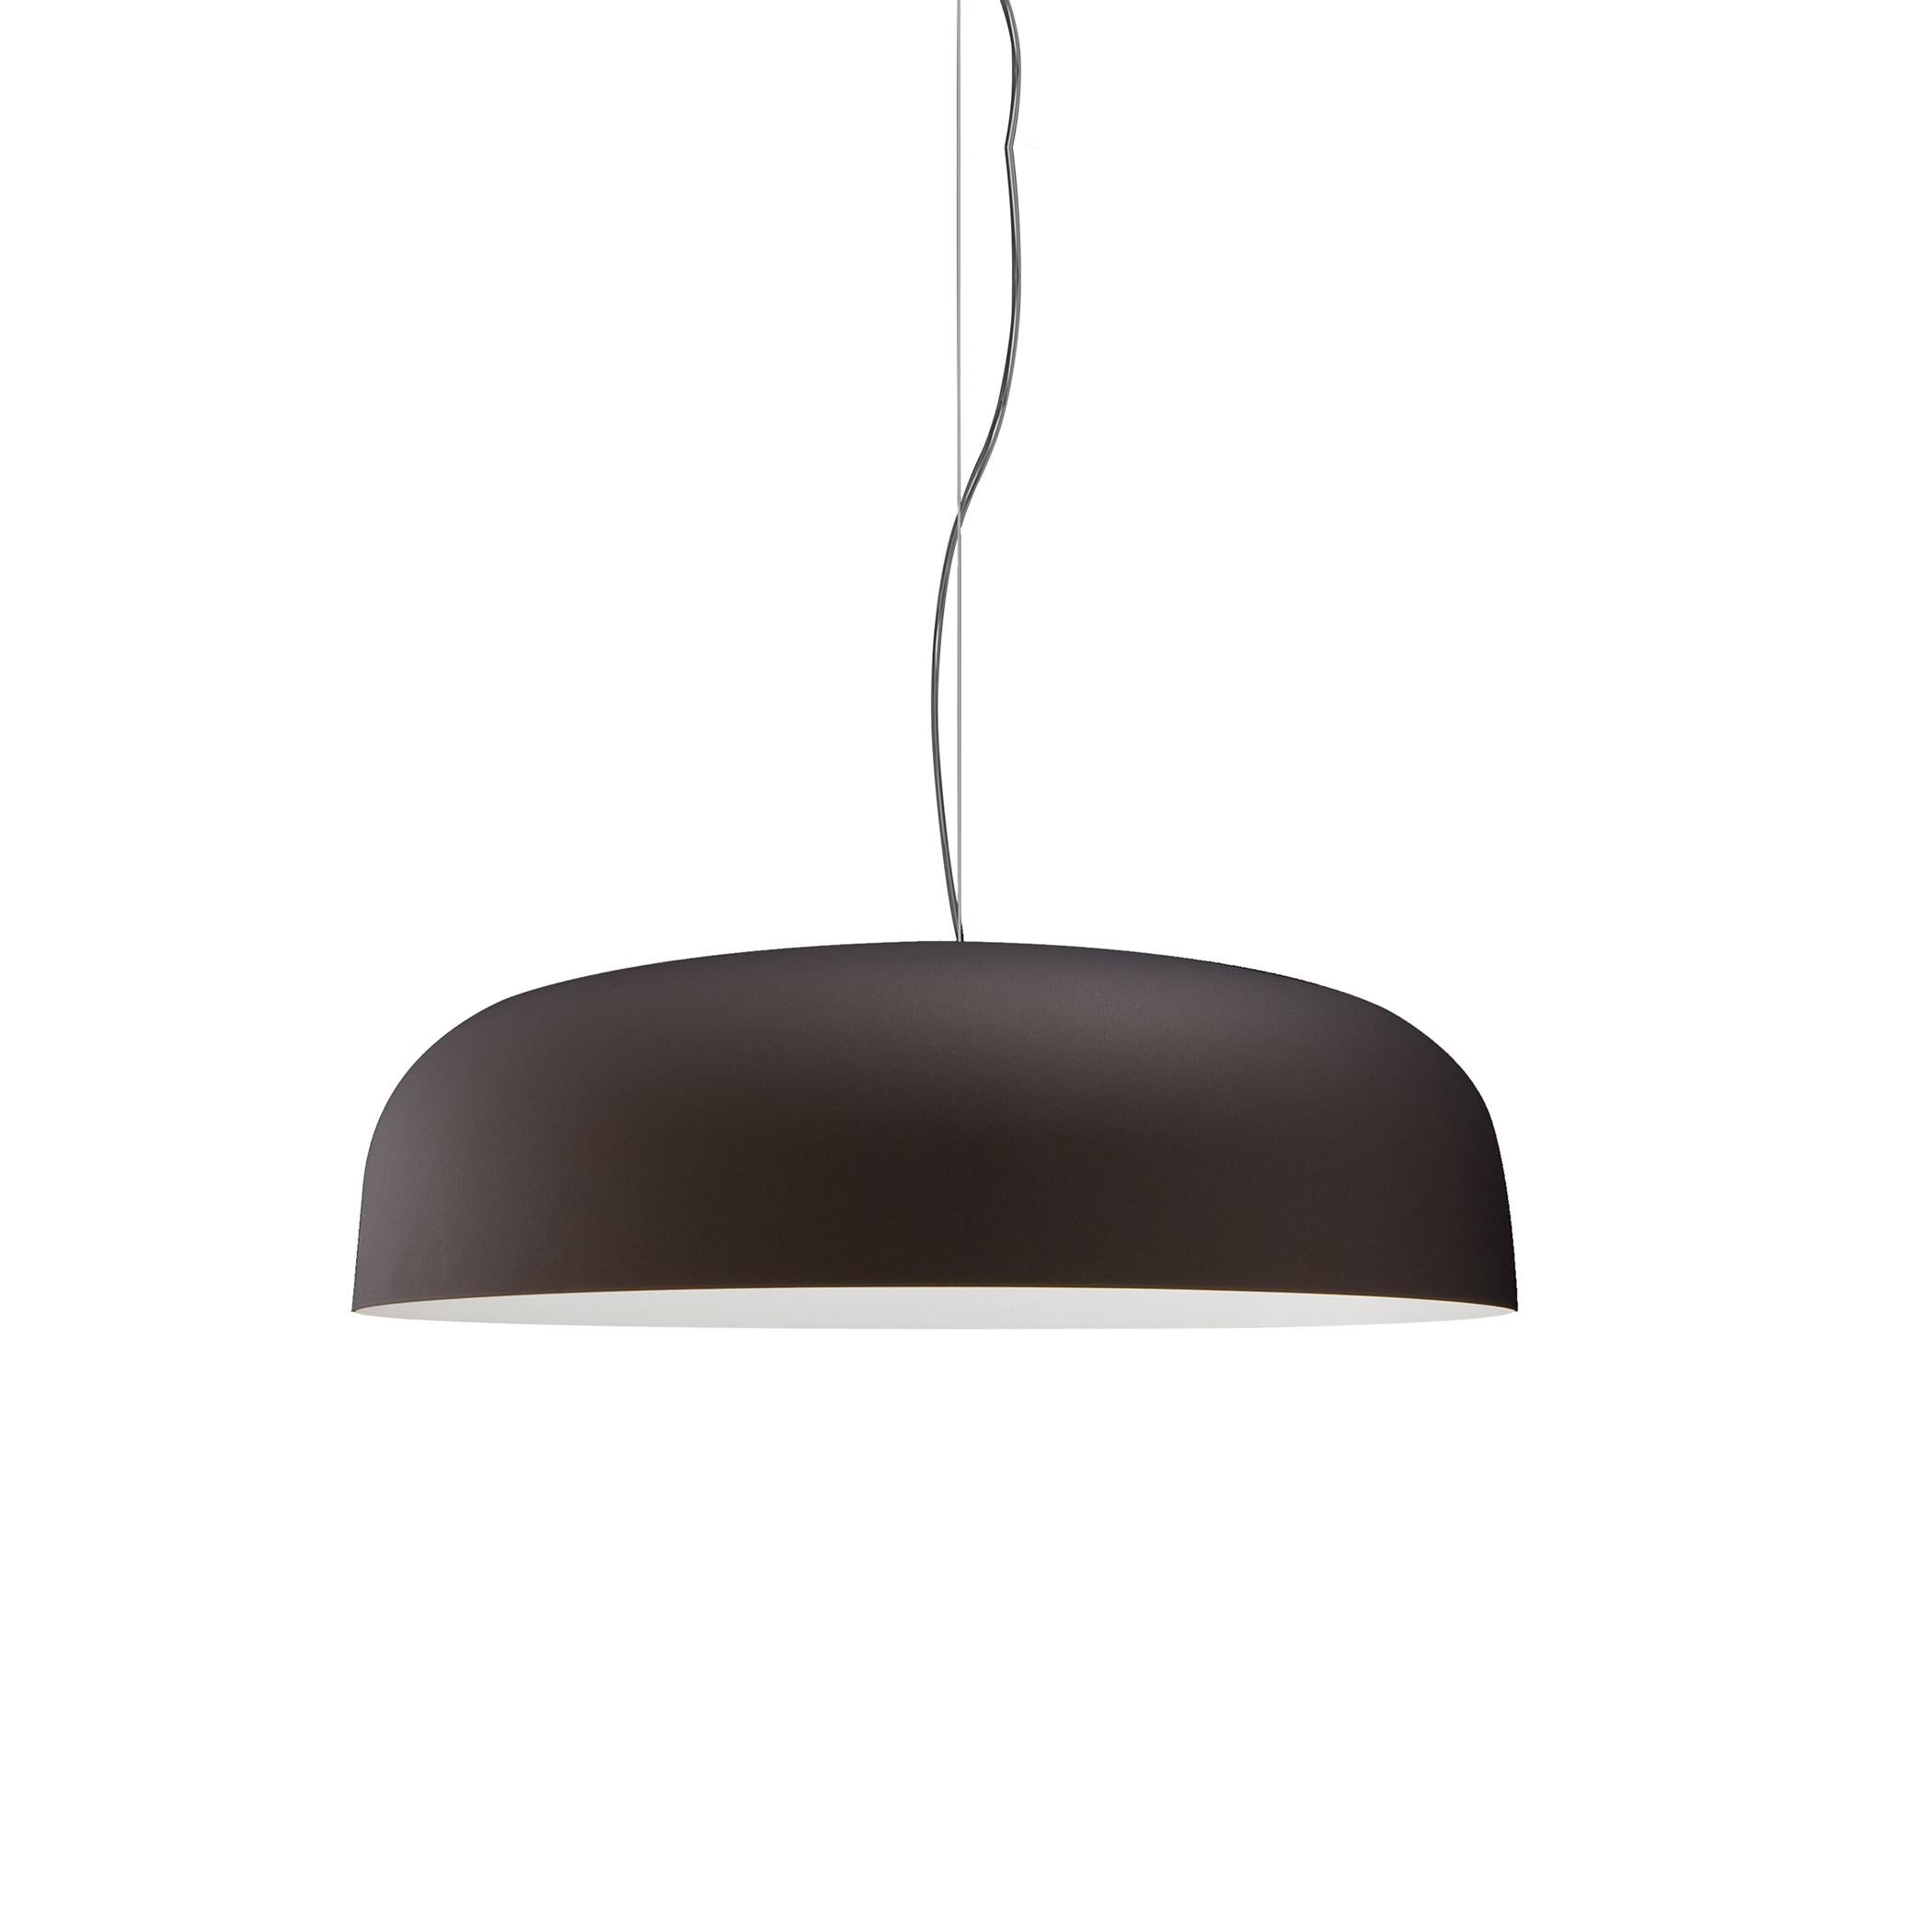 Italian Francesco Rota Suspension Lamp 'Canopy' 421 Bronze and White by Oluce For Sale